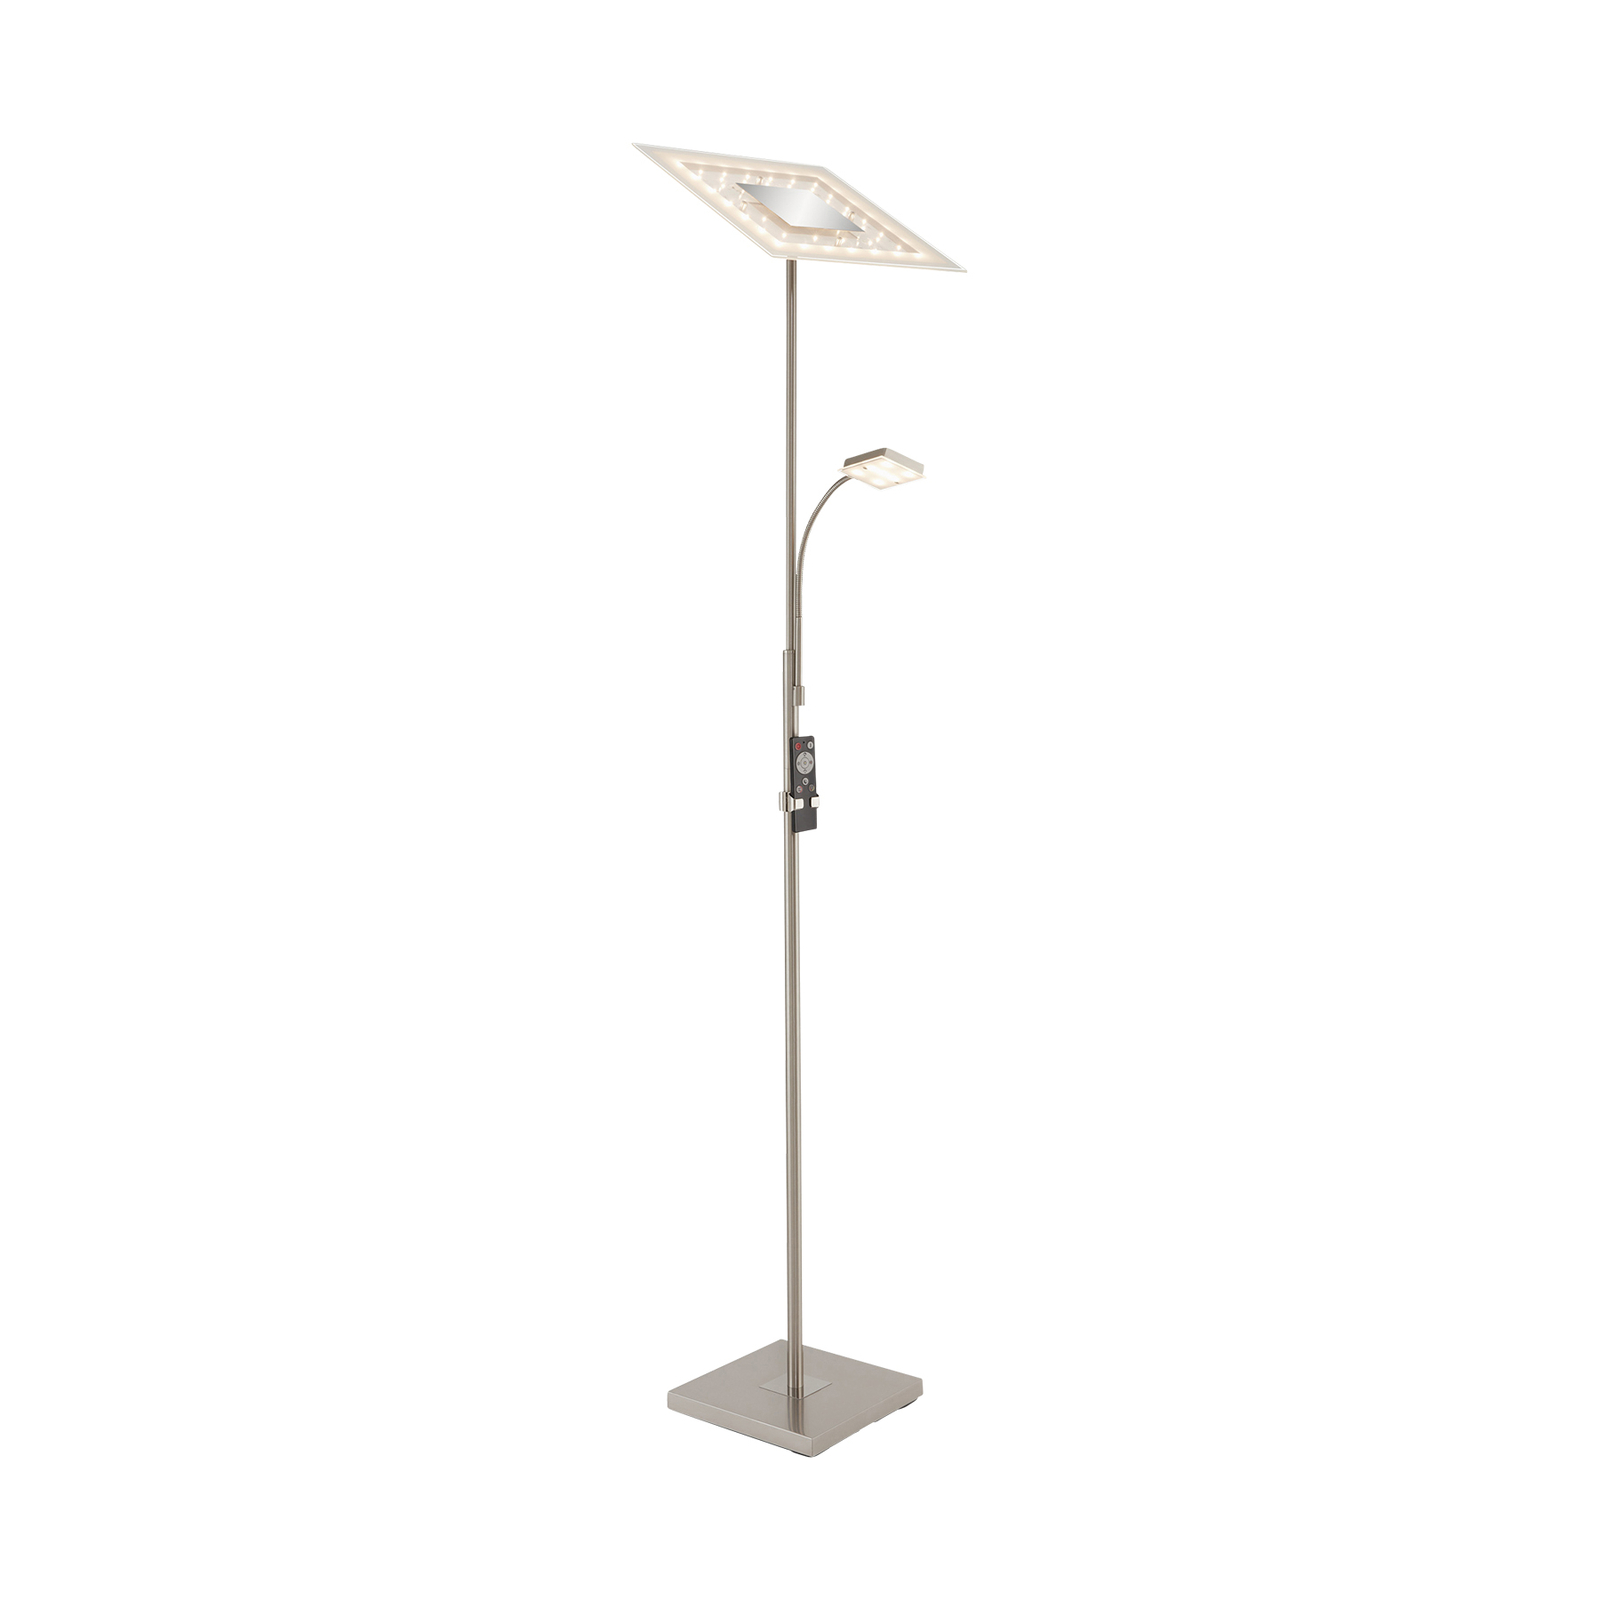 Lampadaire LED 1341-022 nickel dimmable CCT 24 W